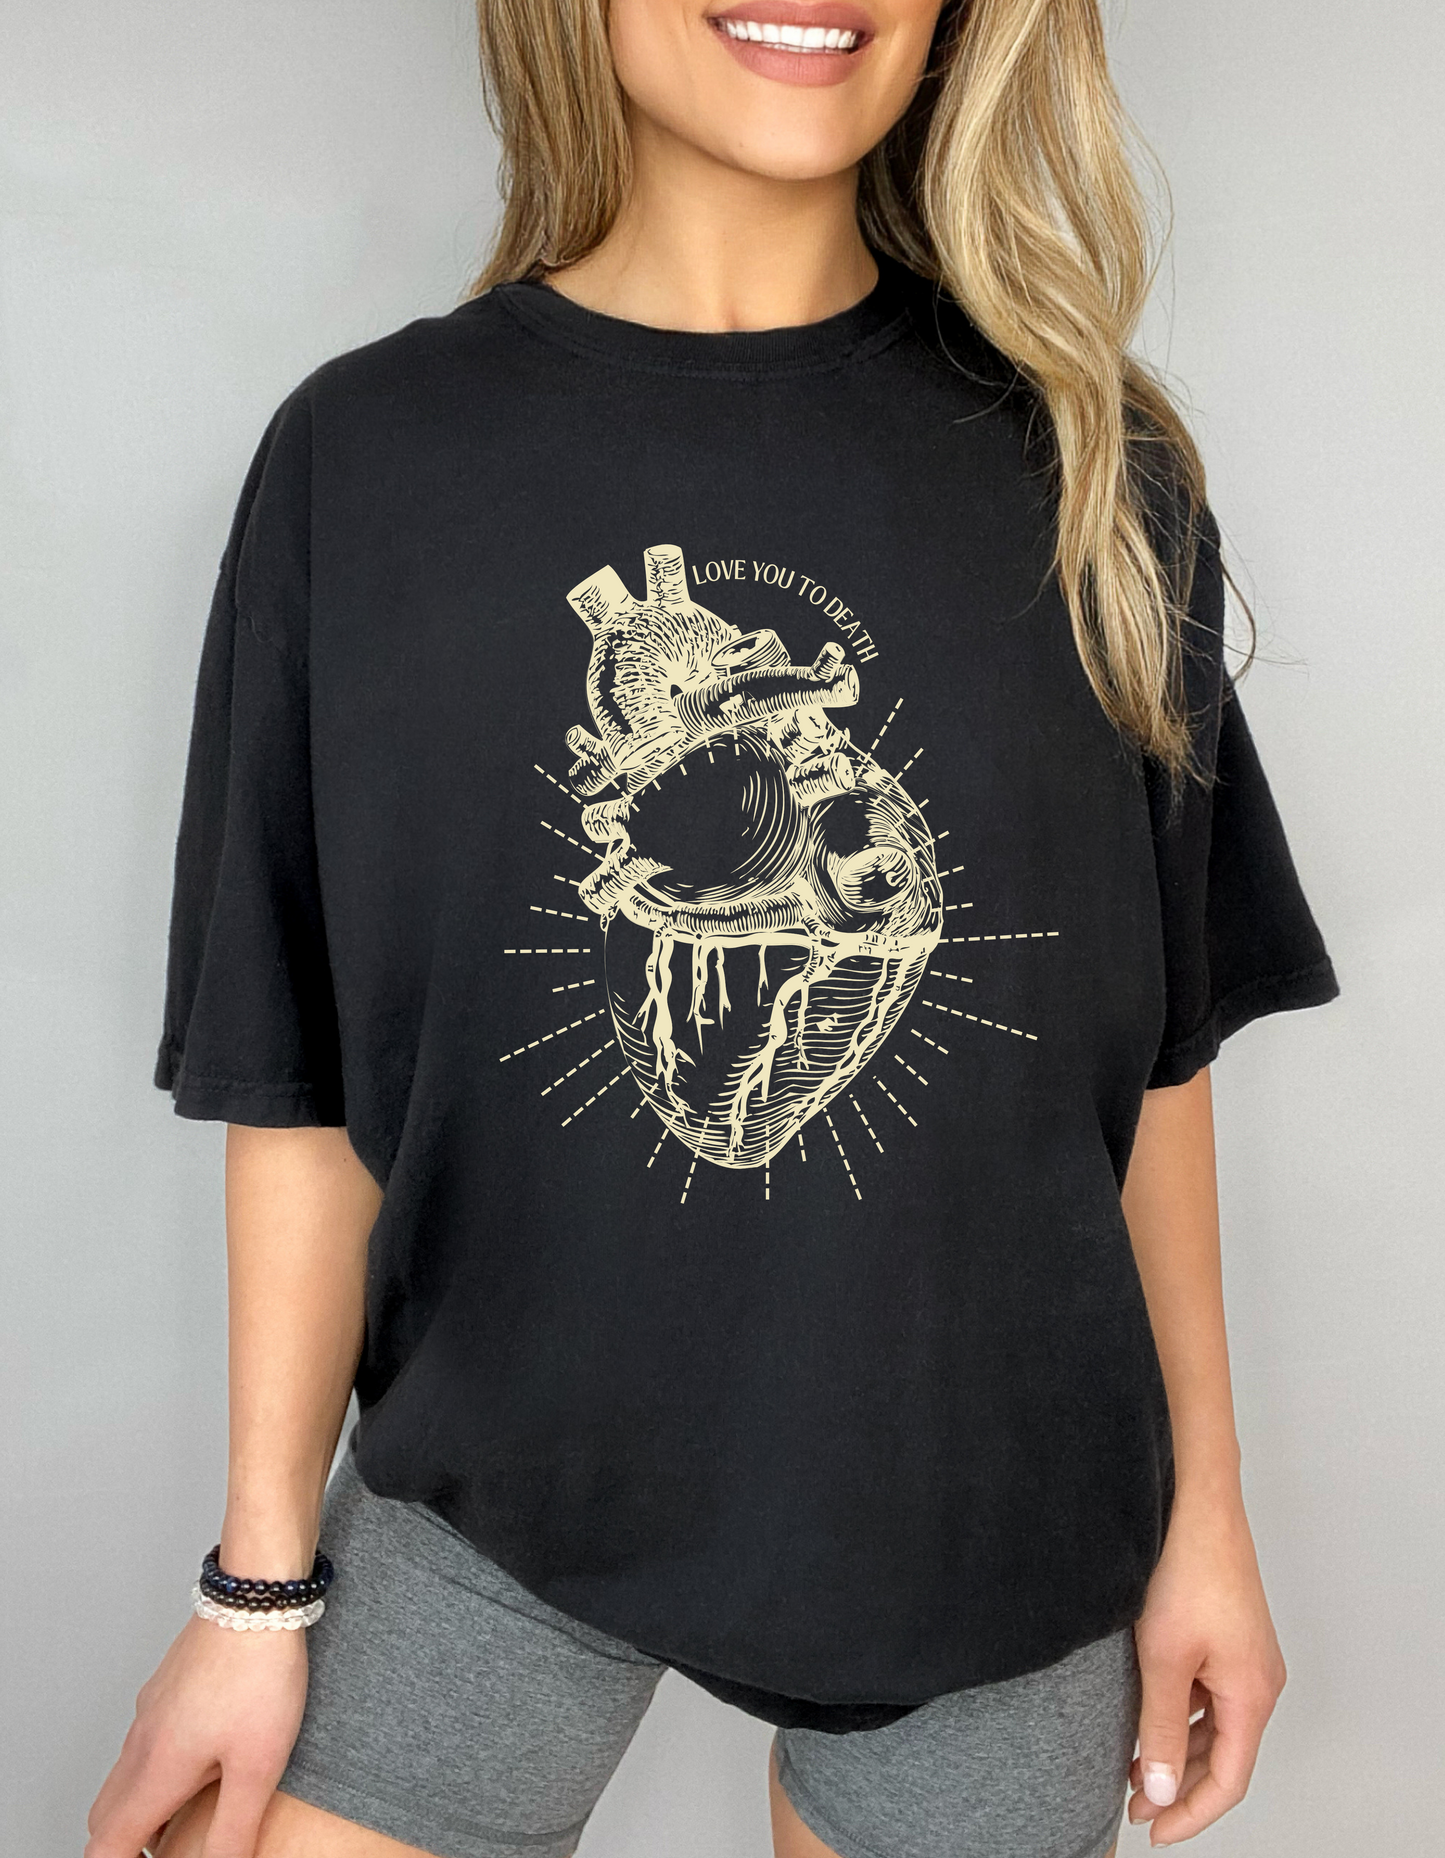 LOVE YOU TO DEATH Human Heart Black Sustainably Made T-Shirt